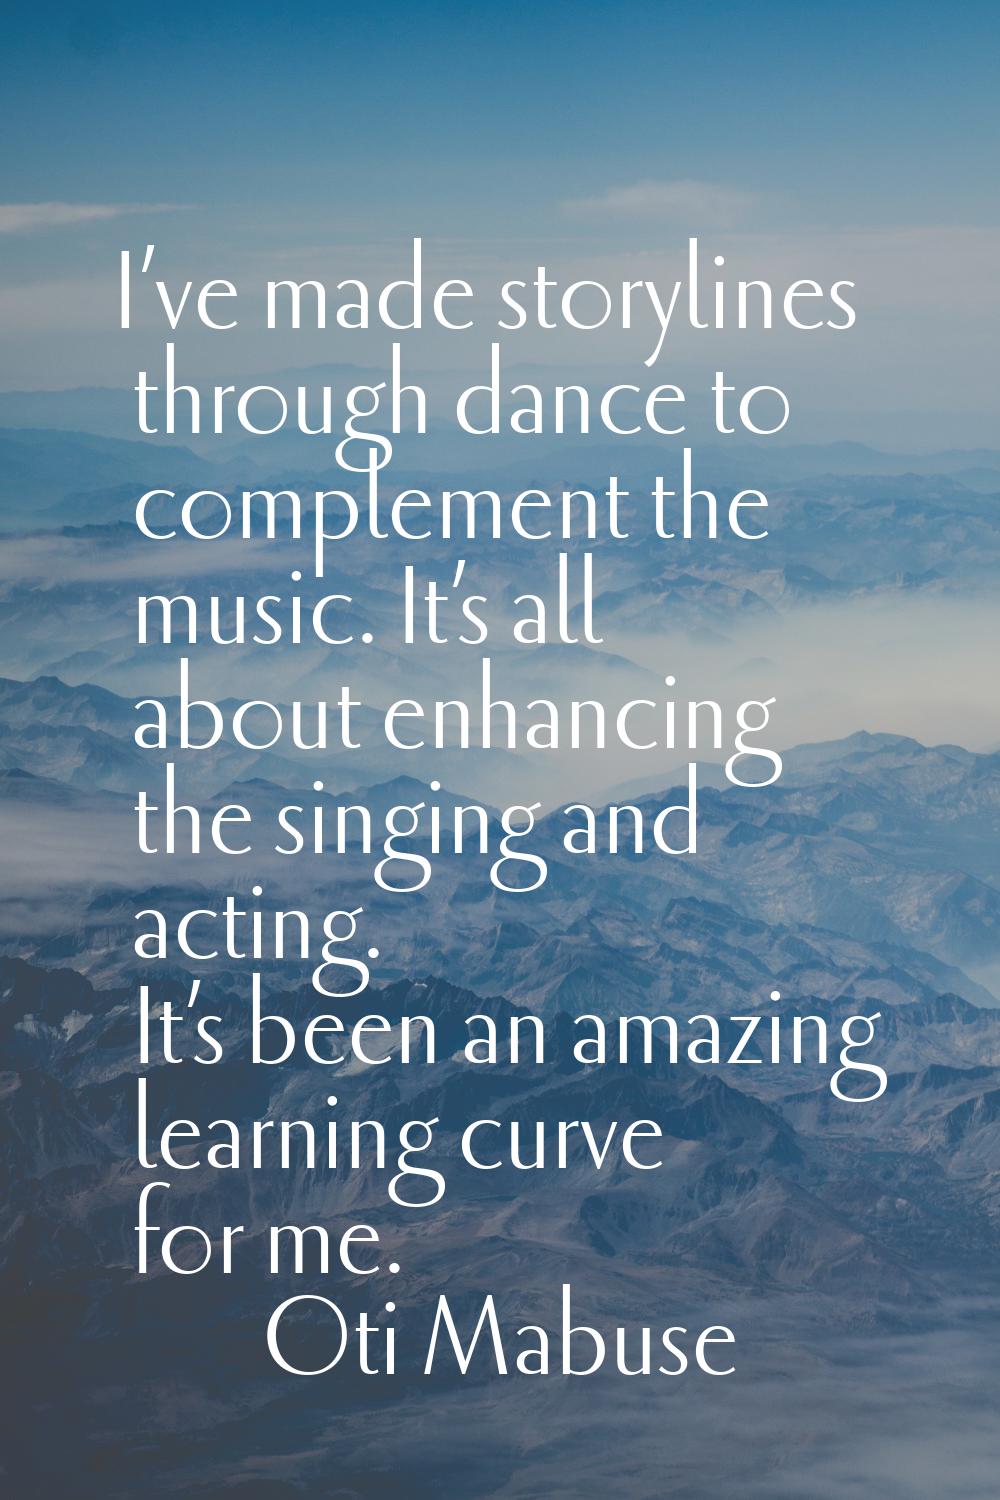 I’ve made storylines through dance to complement the music. It’s all about enhancing the singing an